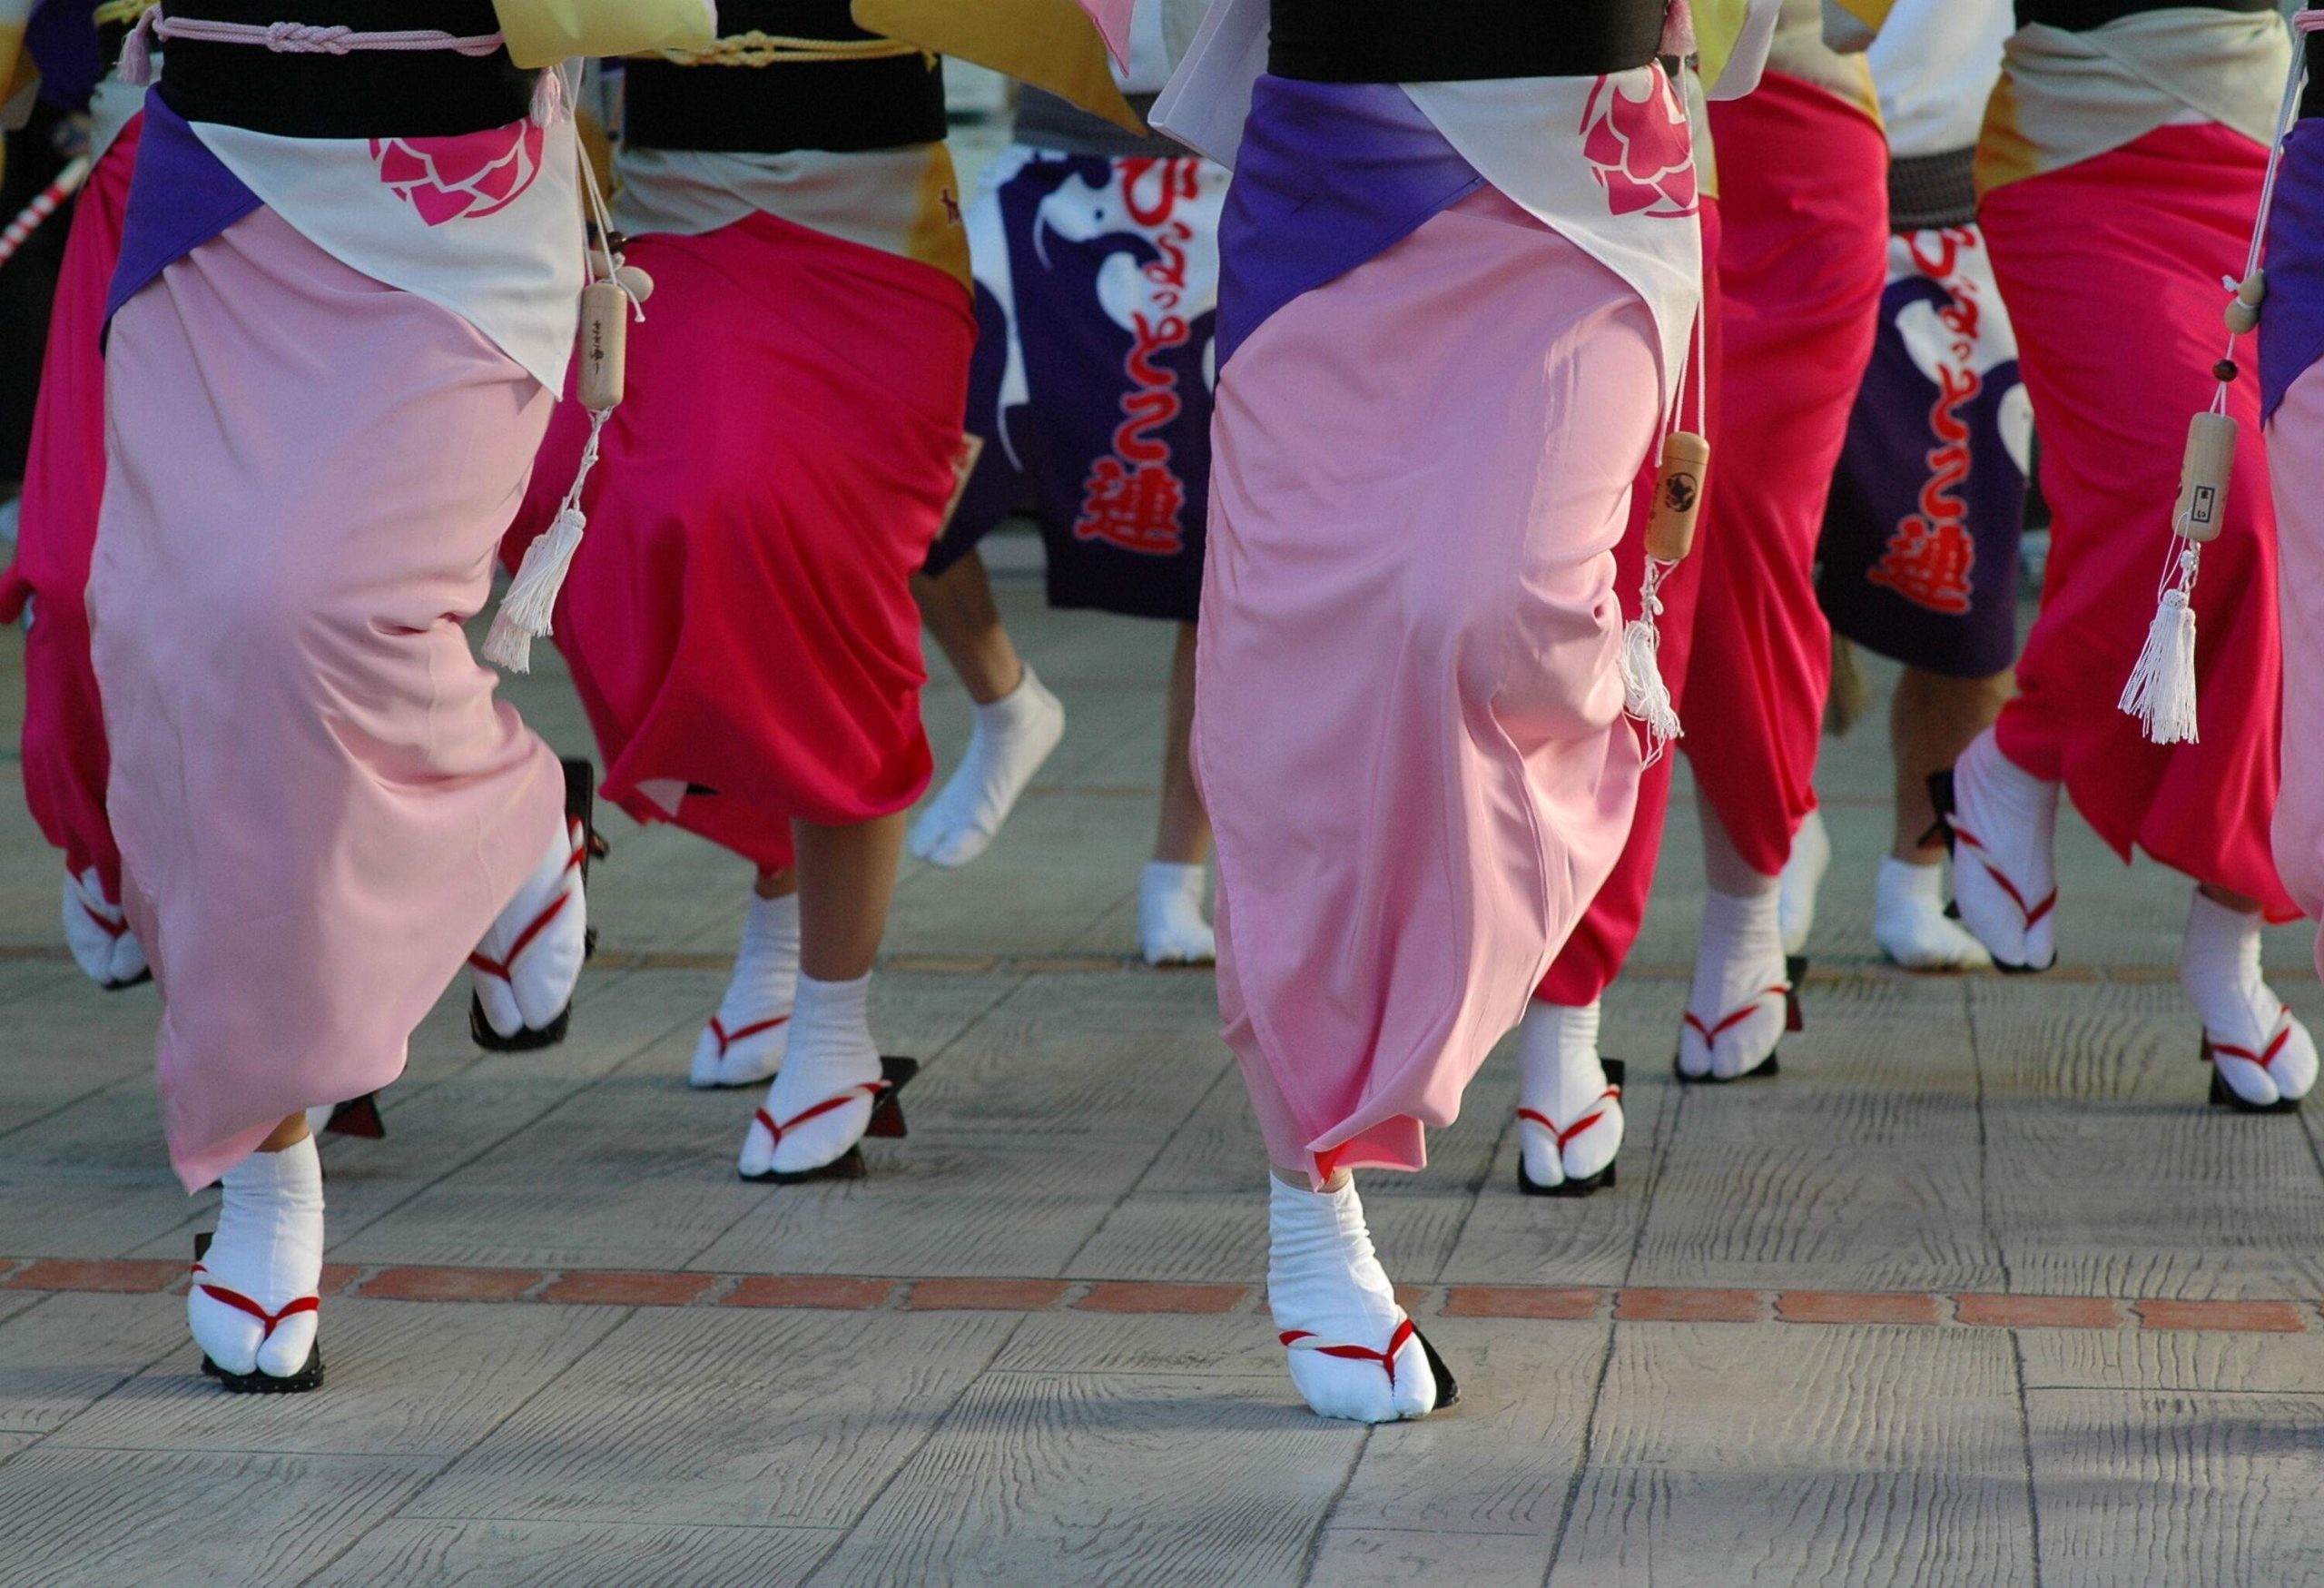 A group of people dance while wearing pink and red sarongs, white socks, and slippers.